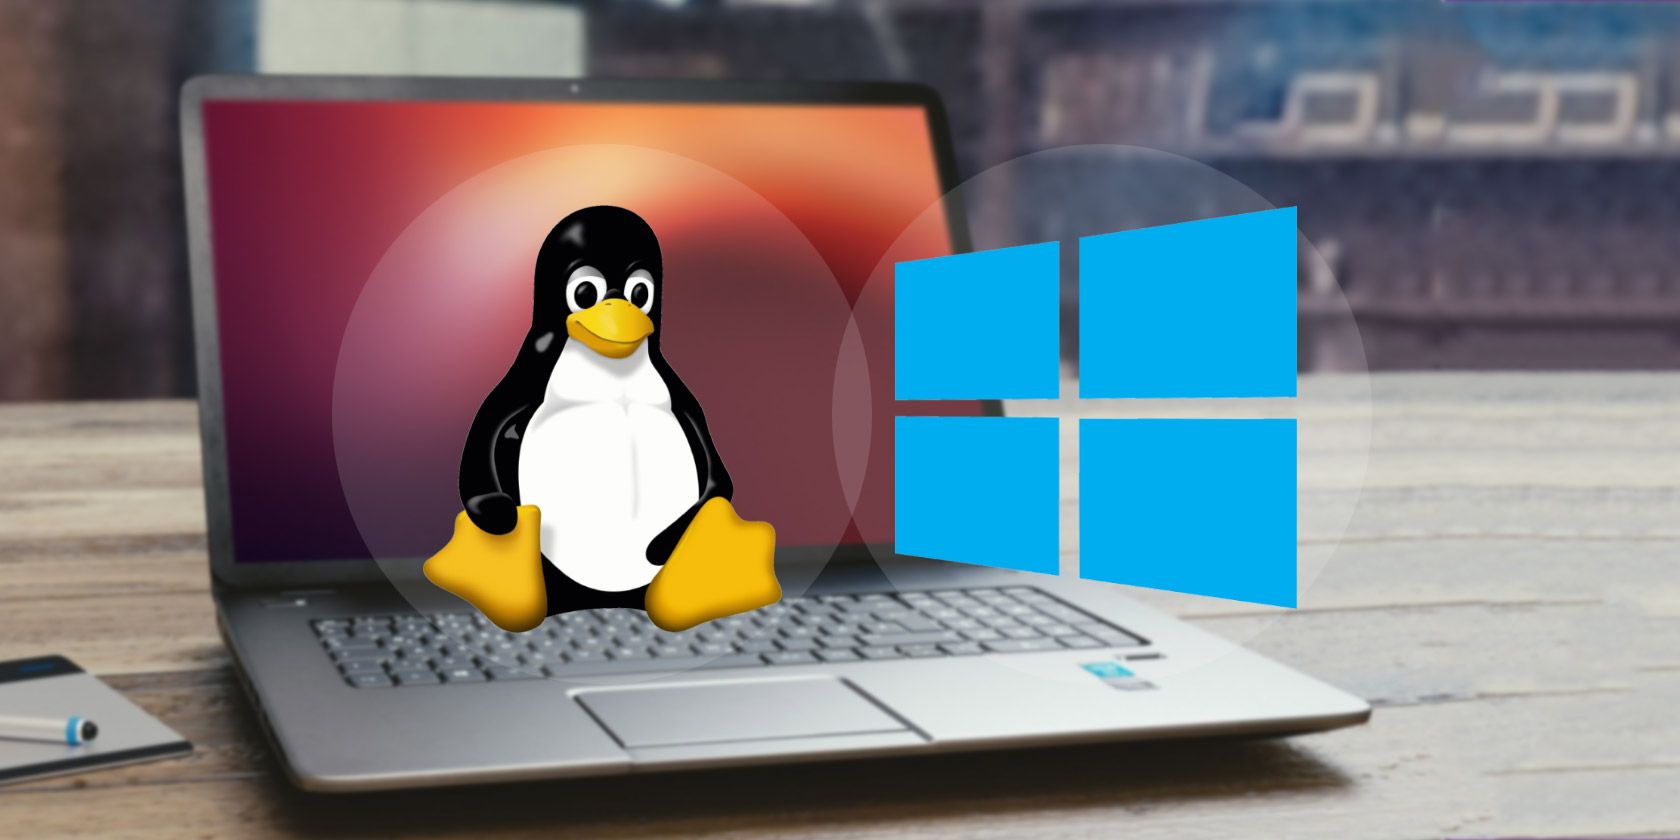 bootable linux iso image